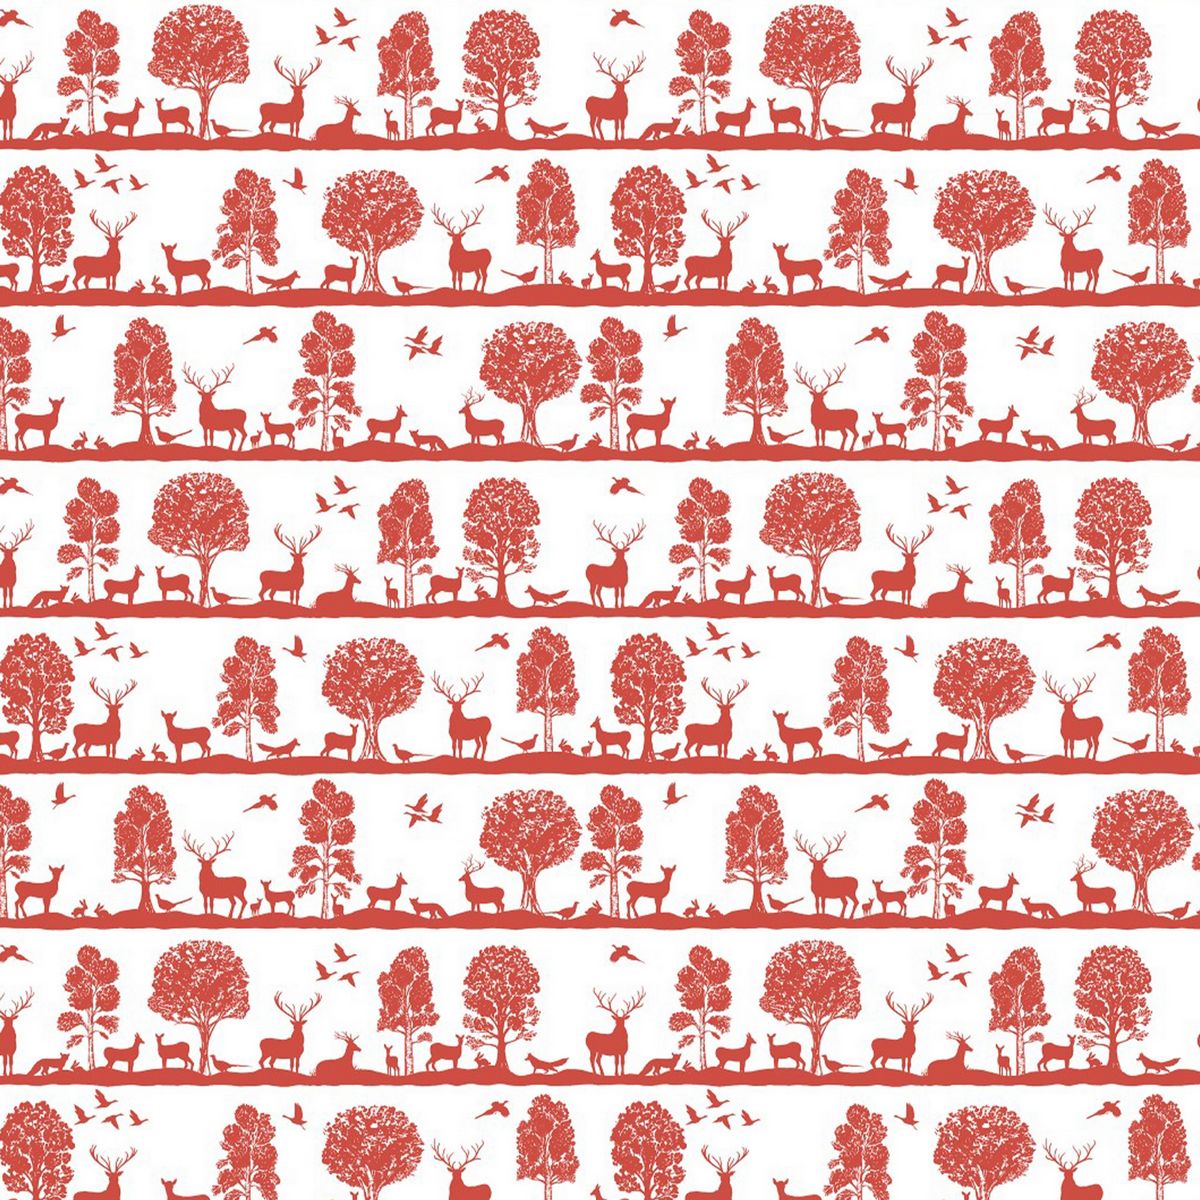 Cairngorms Paprika Fabric by Voyage Maison